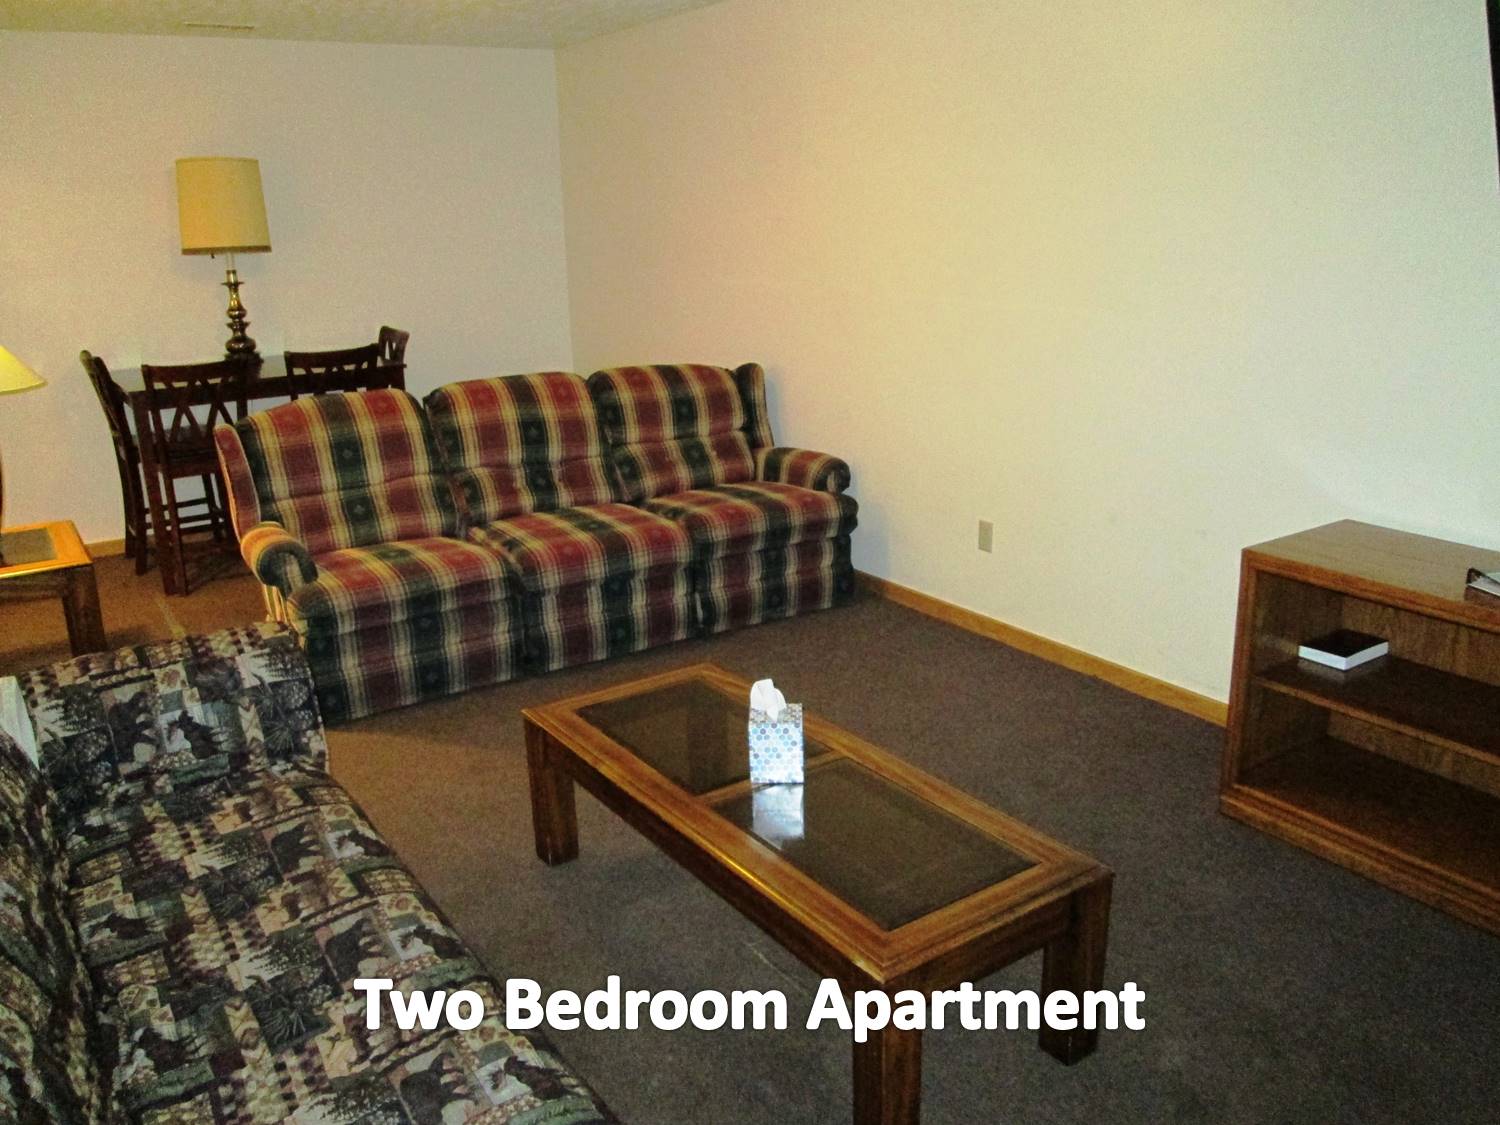 2 bedroom apartment two queen beds, kitchen. lving room with pullout sofa. .